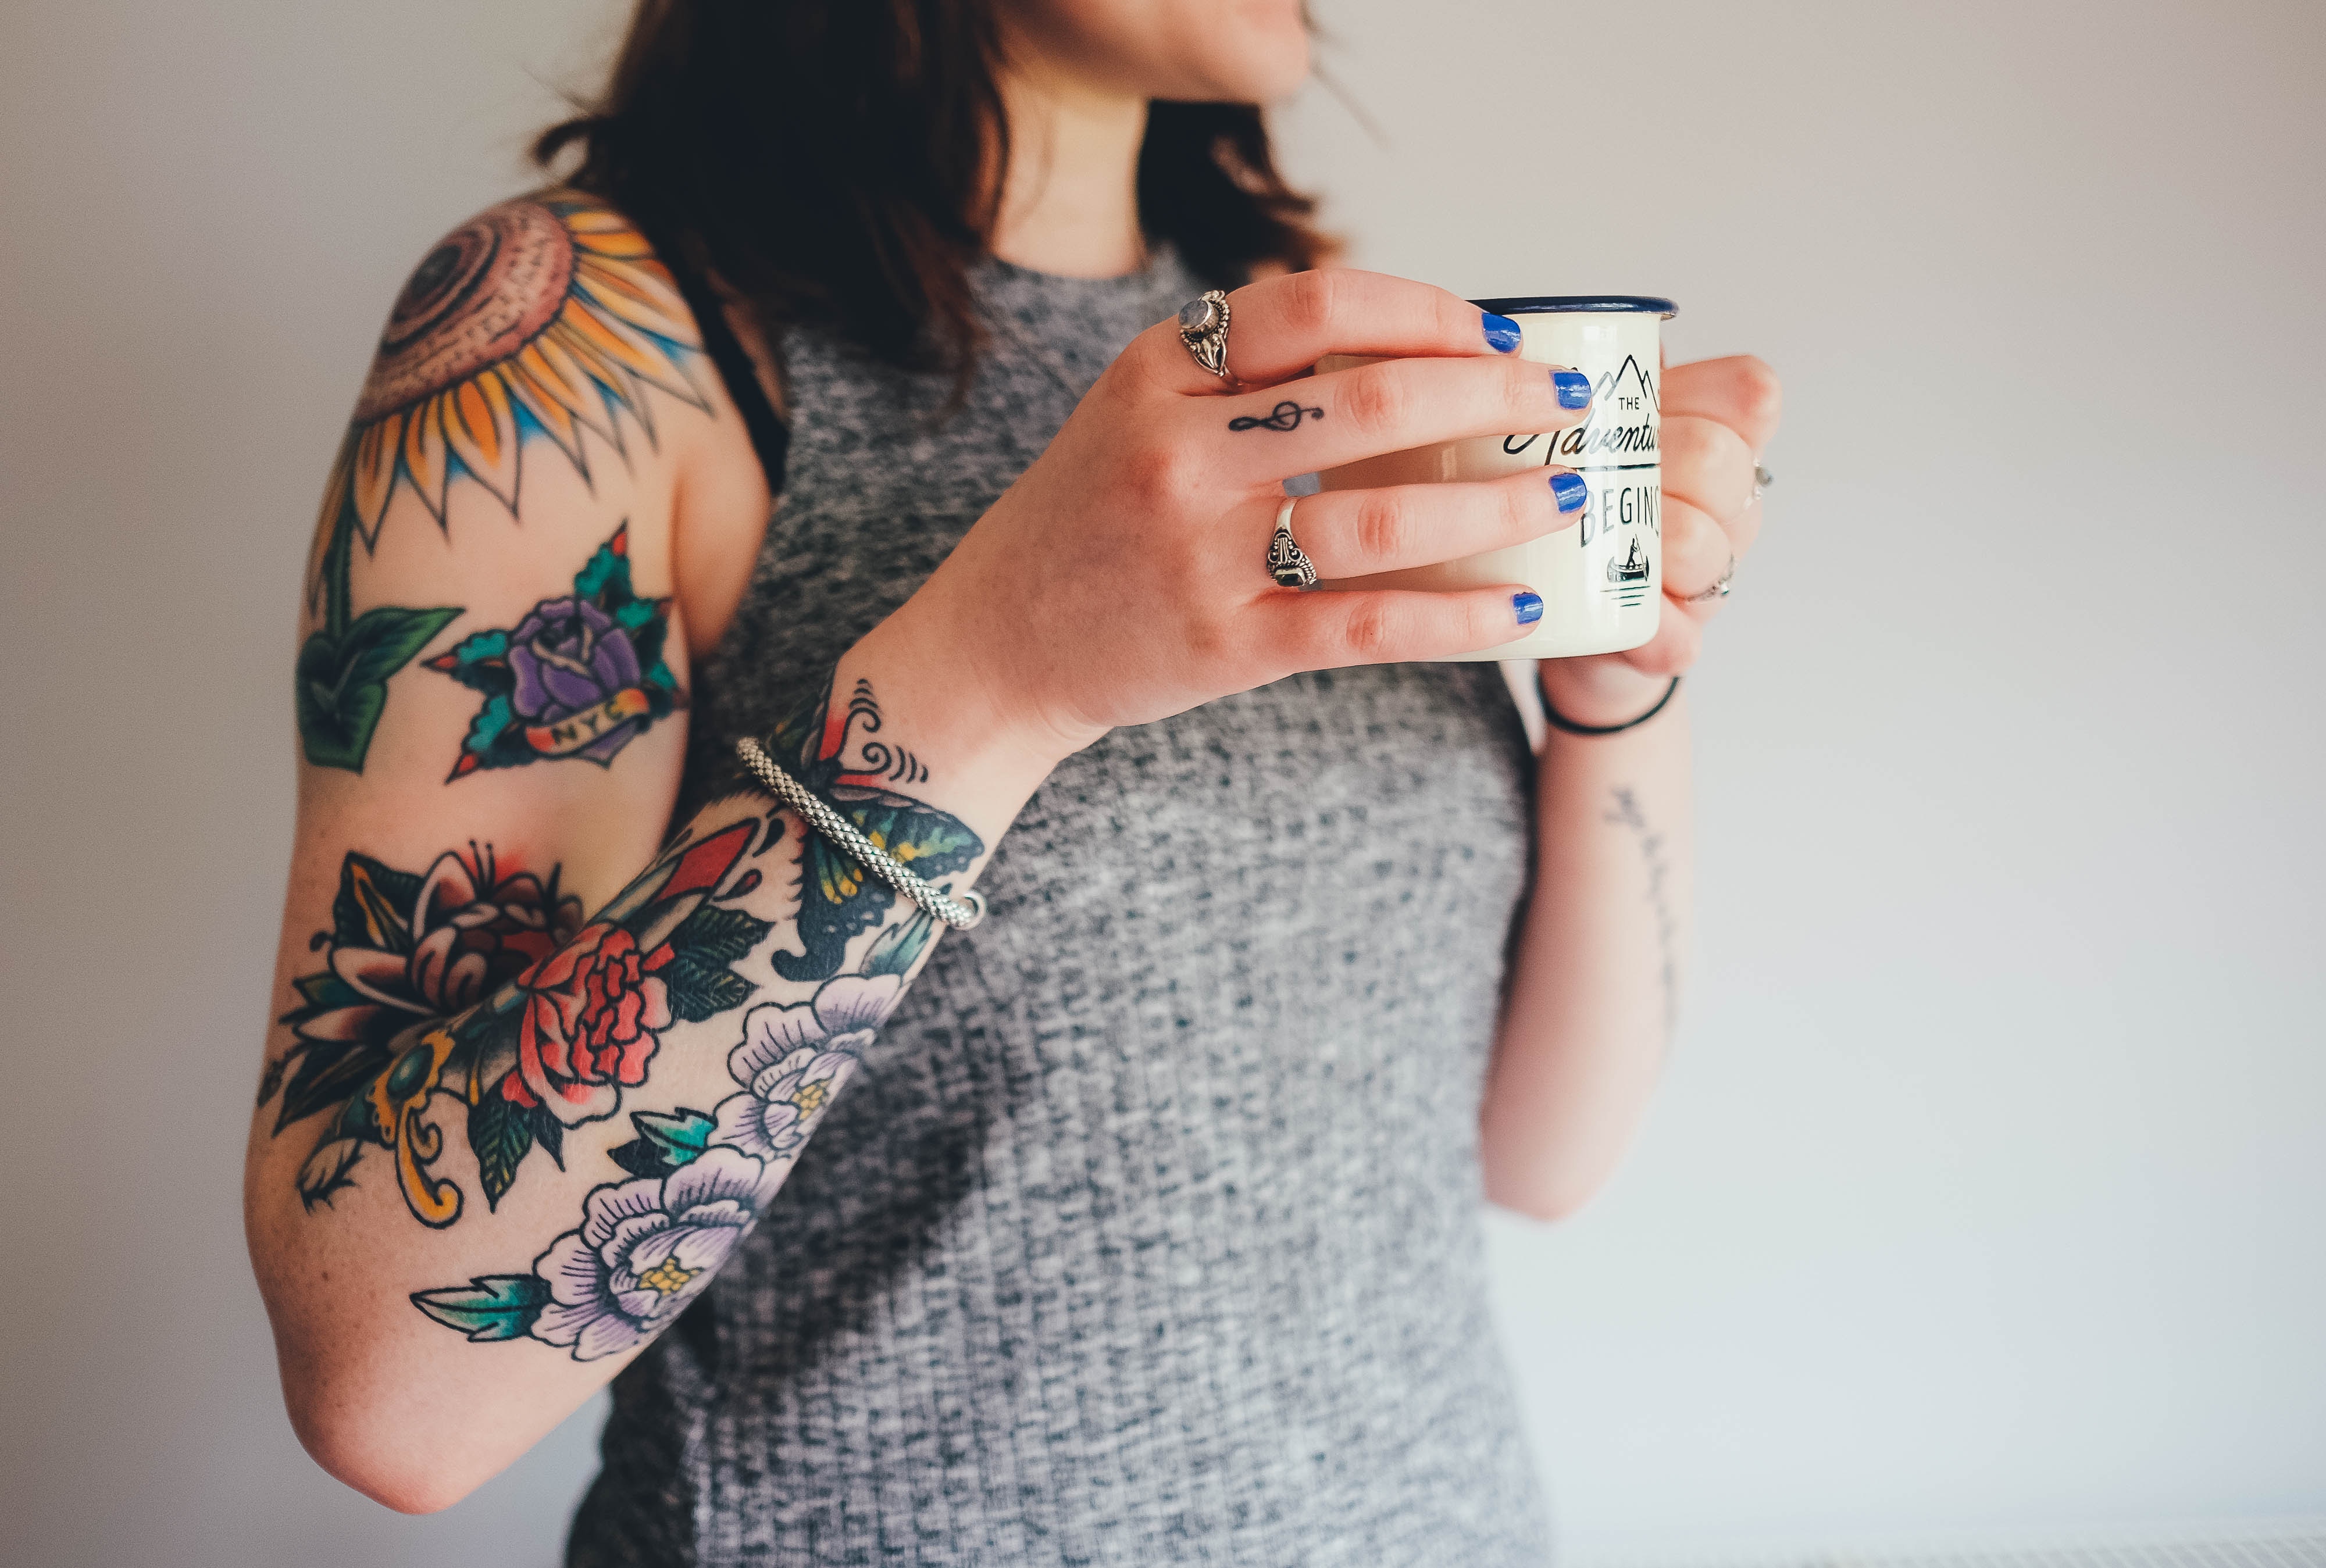 Why To Hire A Professional To Remove Your Unwanted Tattoos?